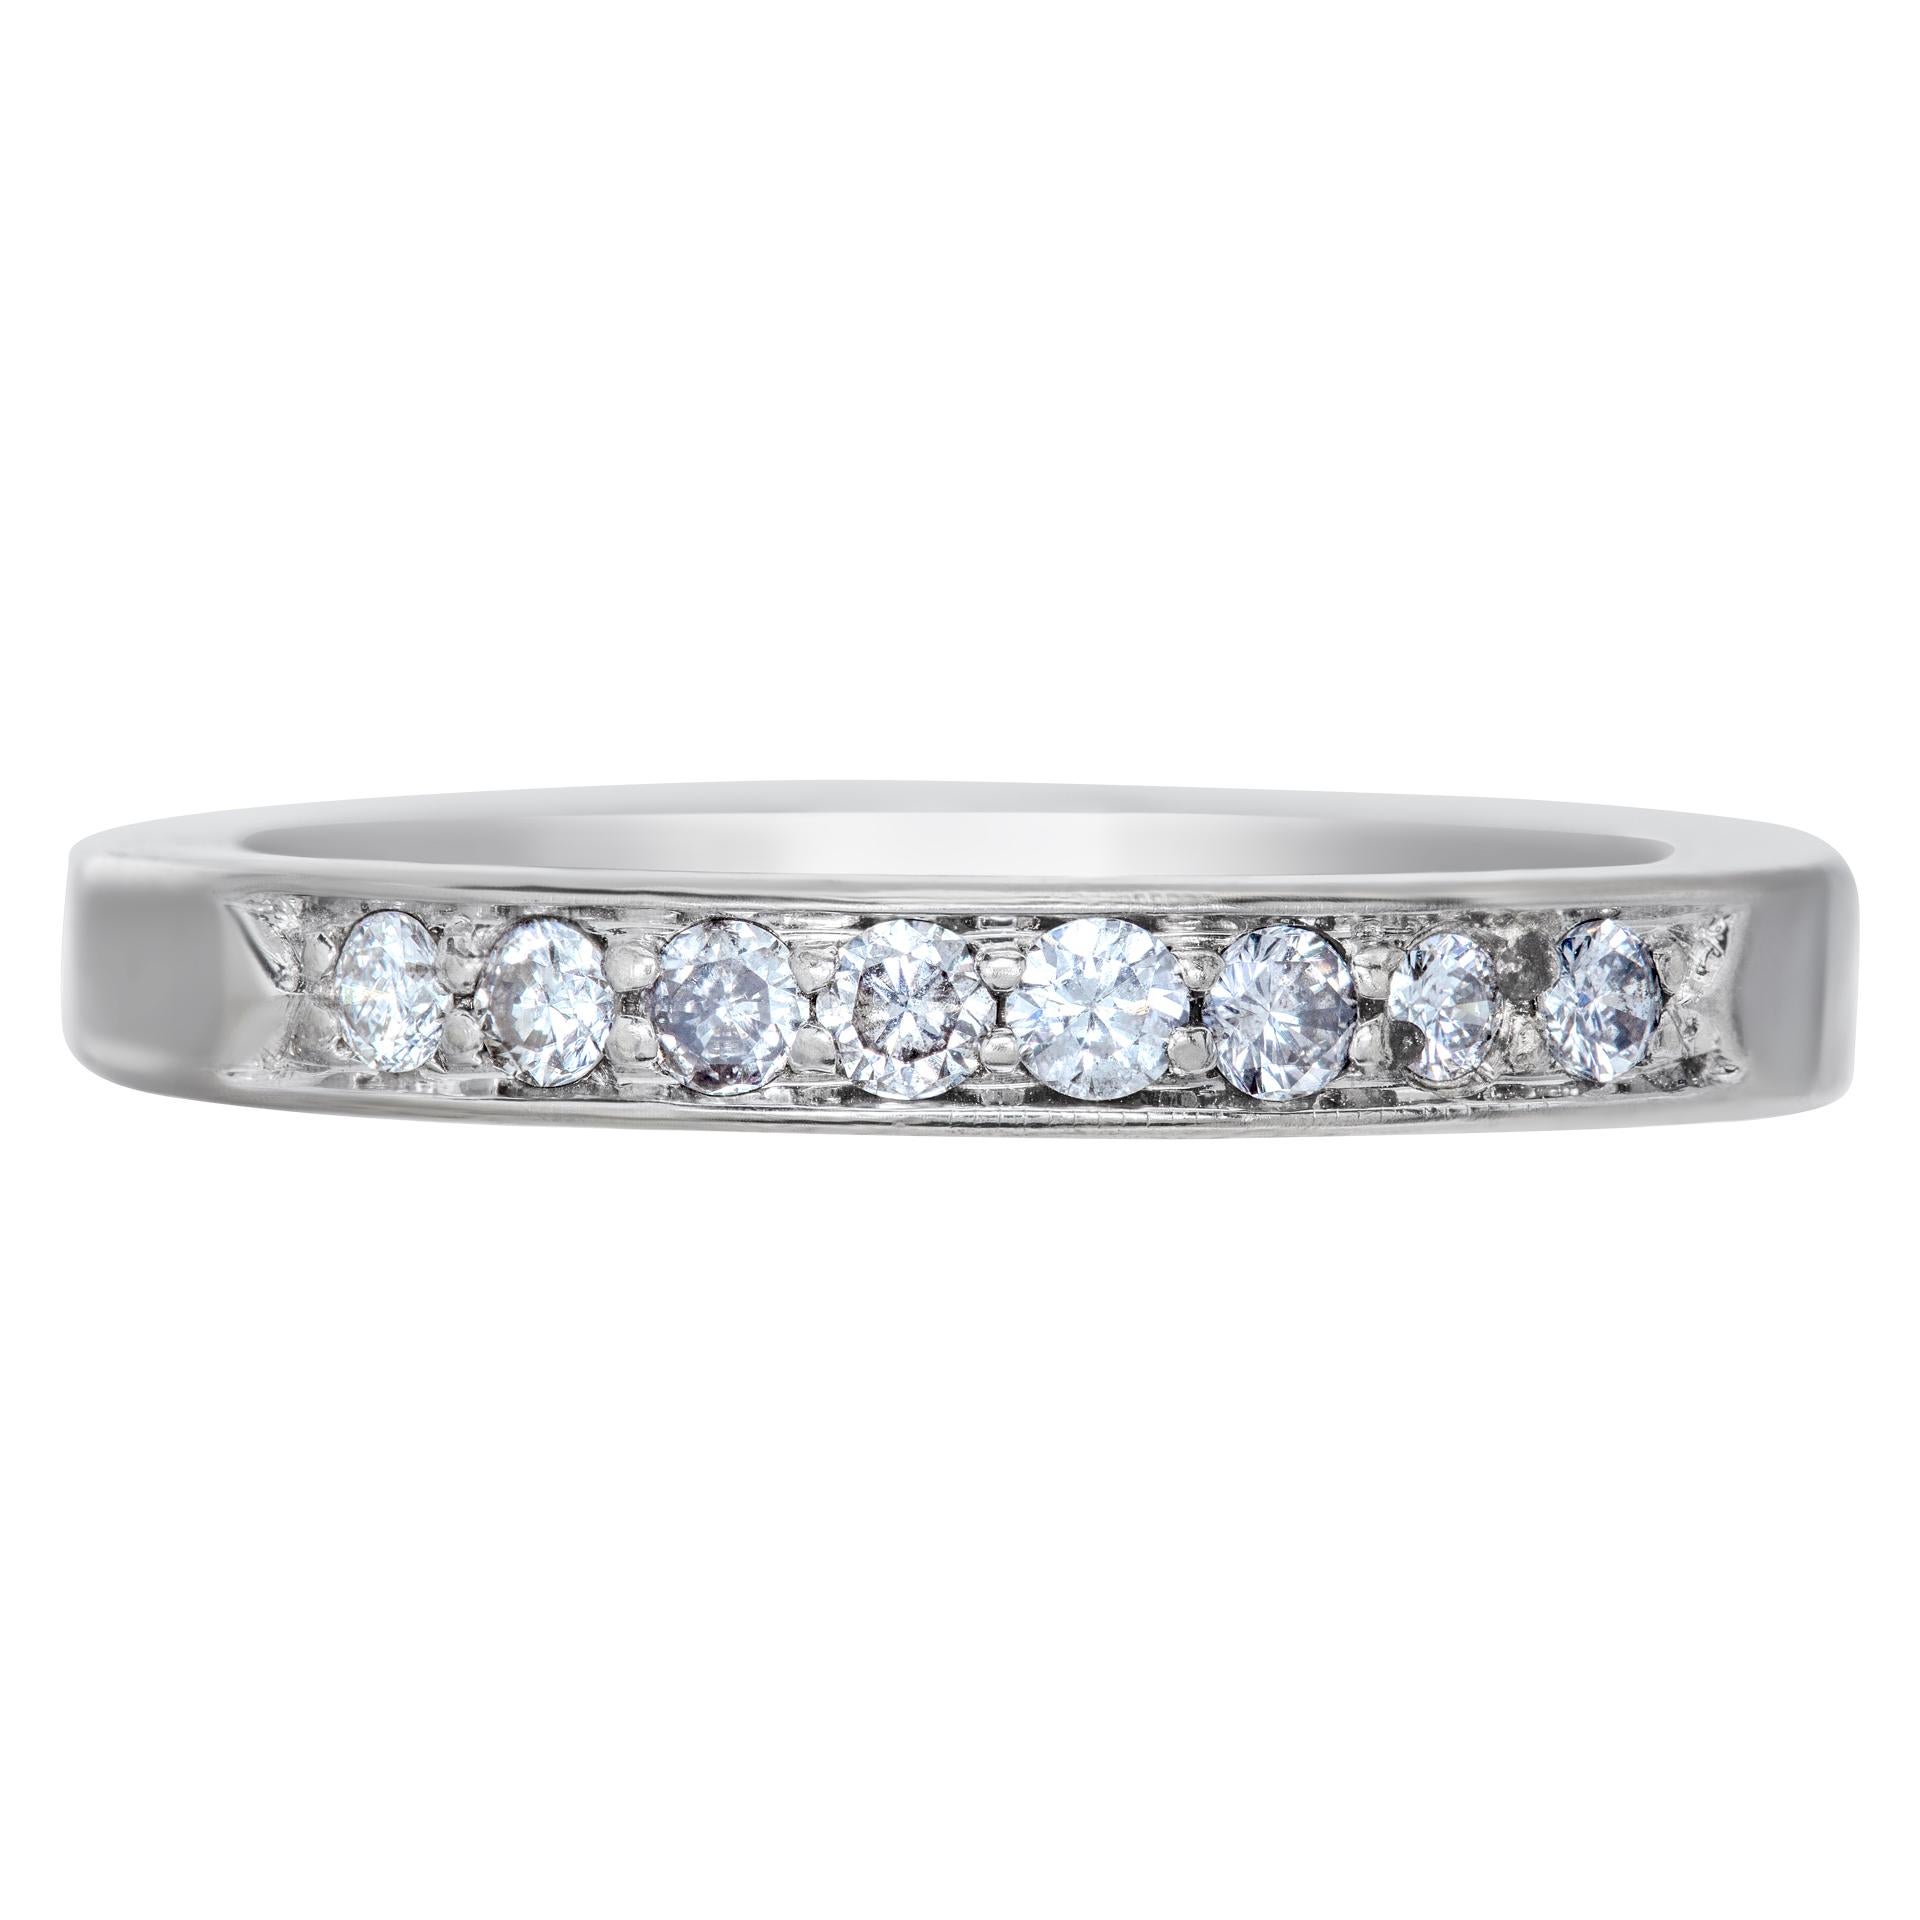 Sleek 18k white gold semi-eternity diamond ring with approx 0.50 cts in diamonds I-J color SI clarity. Size 6.25.This ring is currently size 6.25 and some items can be sized up or down, please ask! It weighs 2.8 pennyweights and is 18k White Gold.
